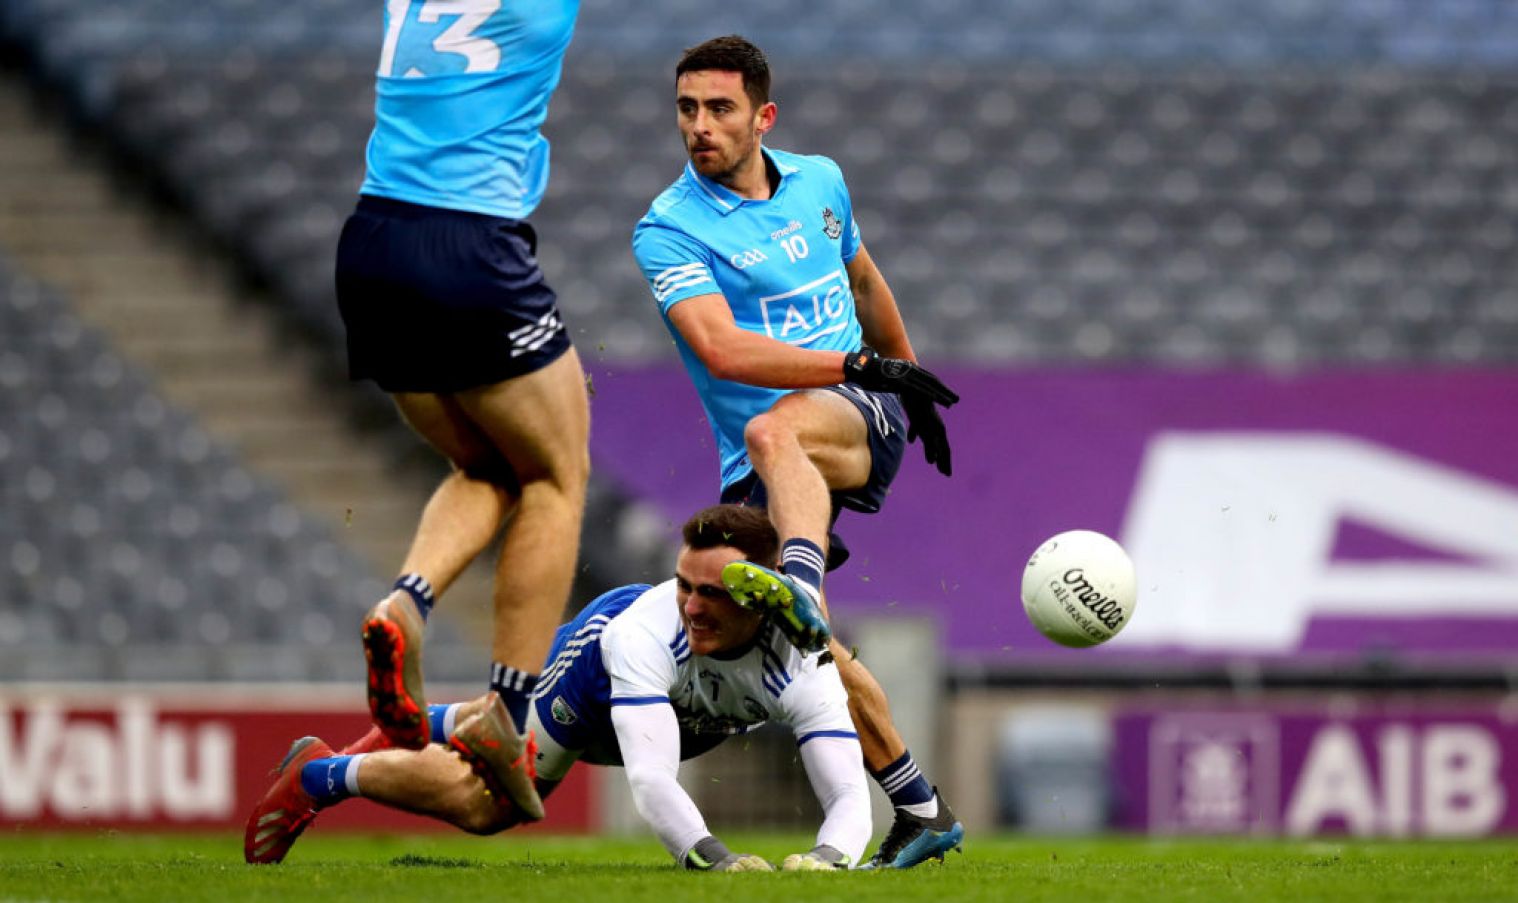 Niall Corbet Of Laois Blocks Down Dublin's Niall Scully. Credit ©Inpho/Ryan Byrne